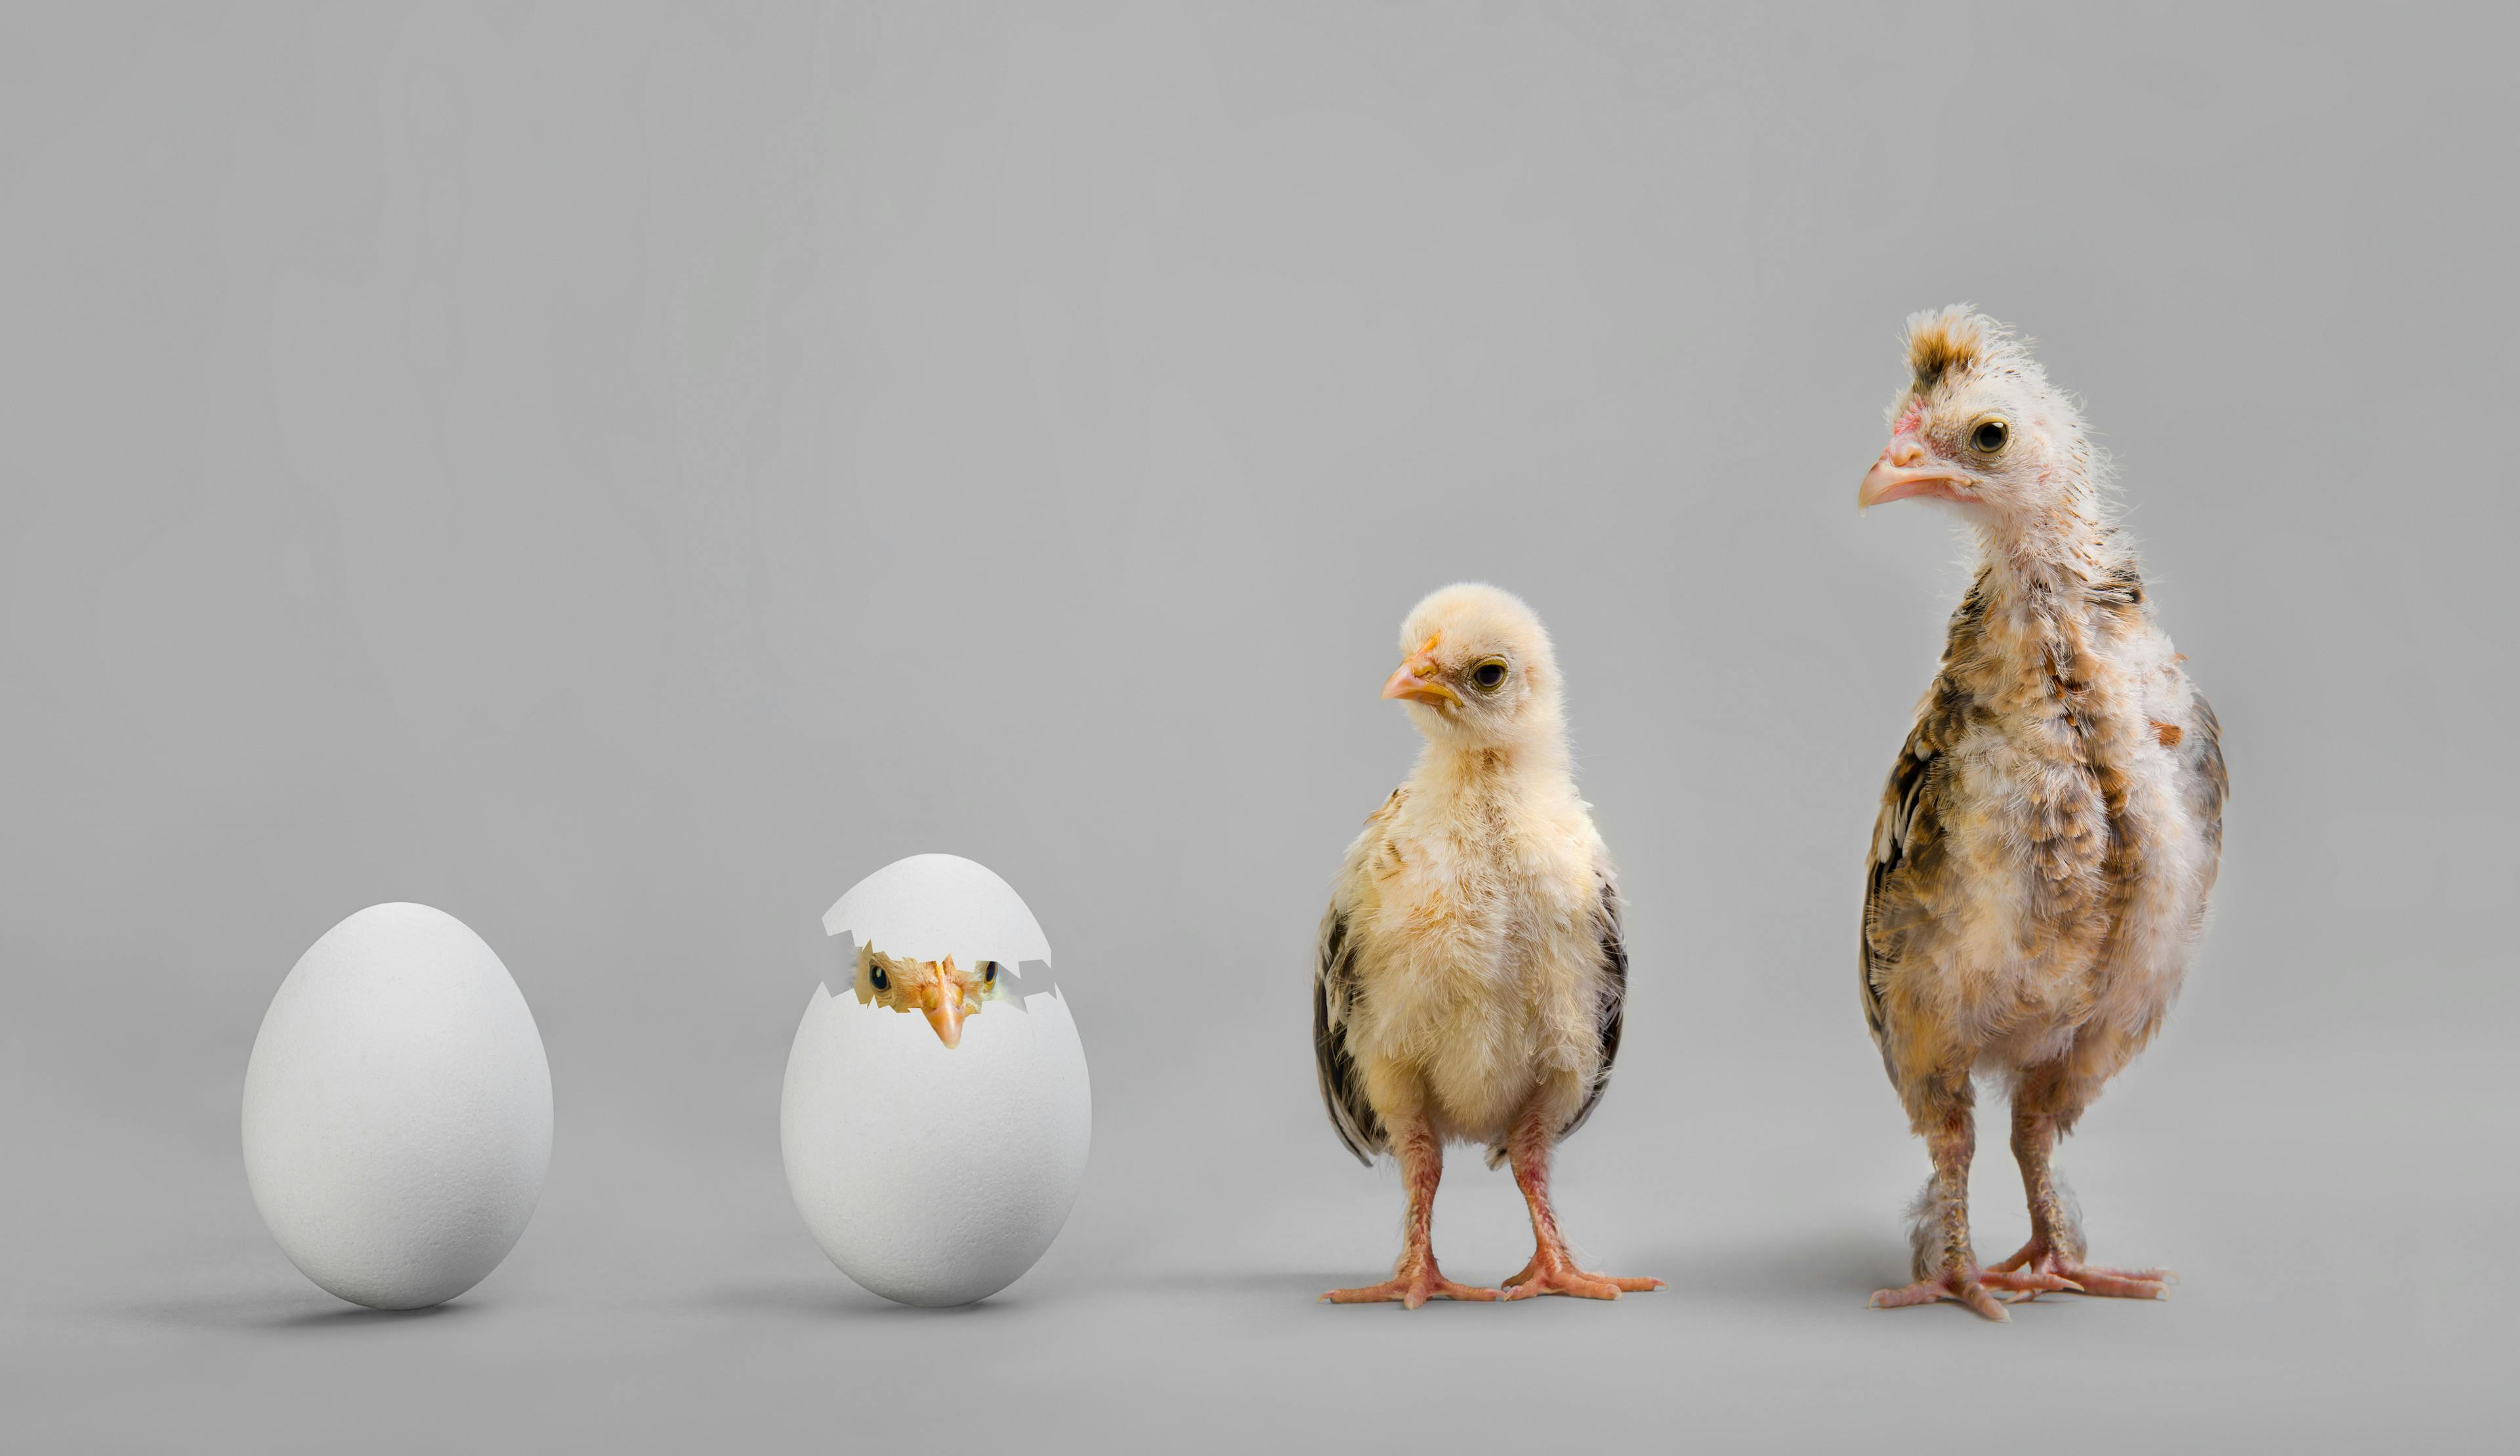 Picture of chicks illustrating growth